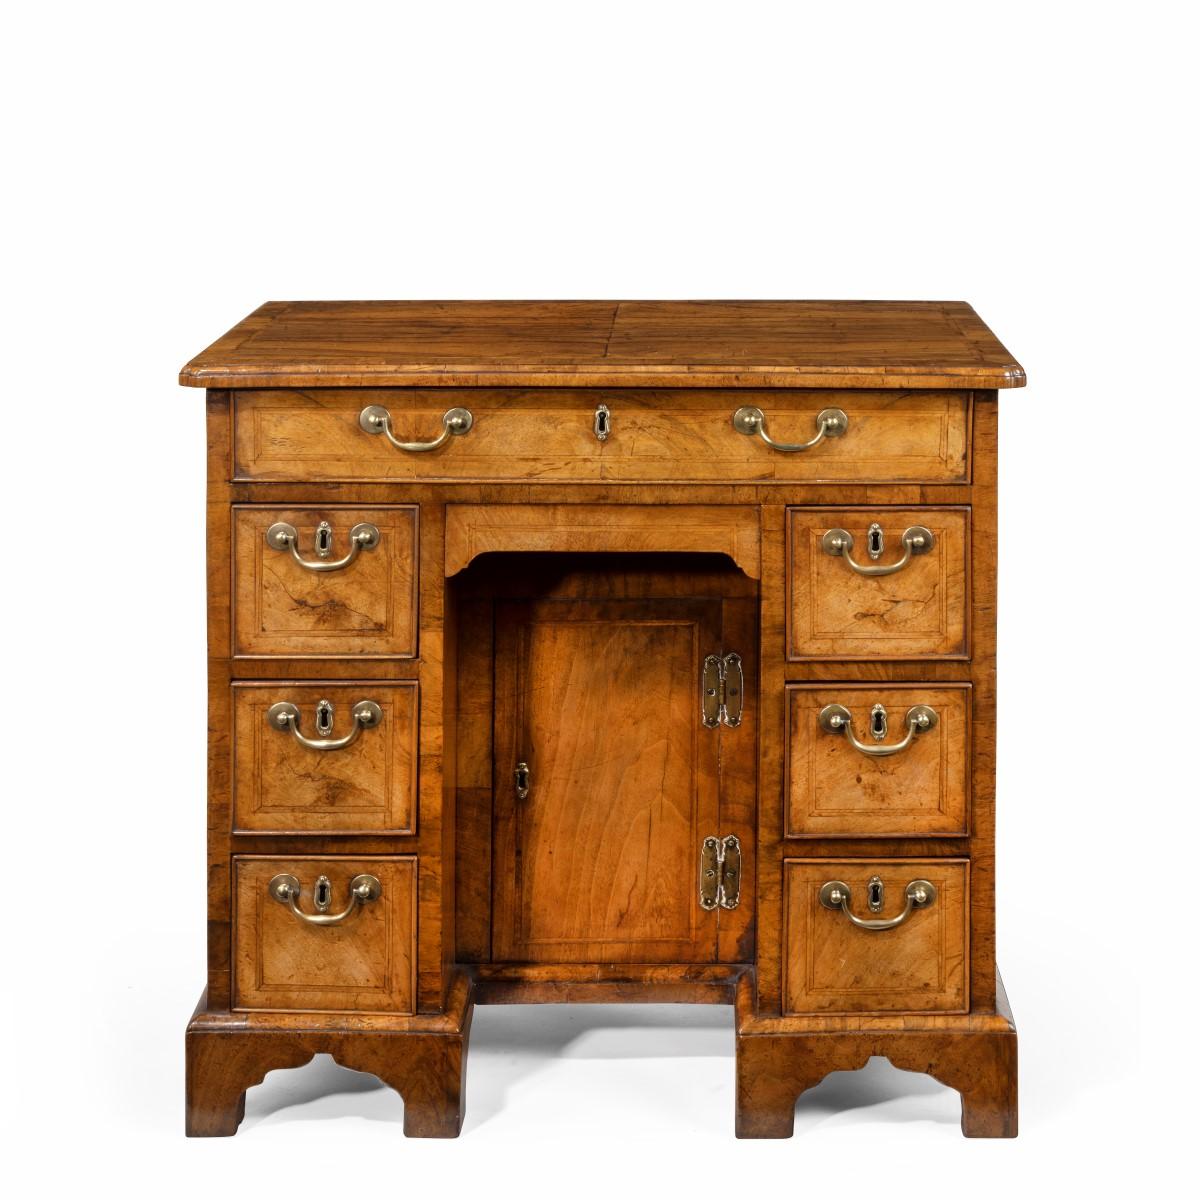 An early George III walnut kneehole desk, the shaped rectangular top quarter veneered with re-entrant corners and herring bone cross-banding, with one long drawer above a disguised drawer in the apron, the kneehole with a central cupboard and